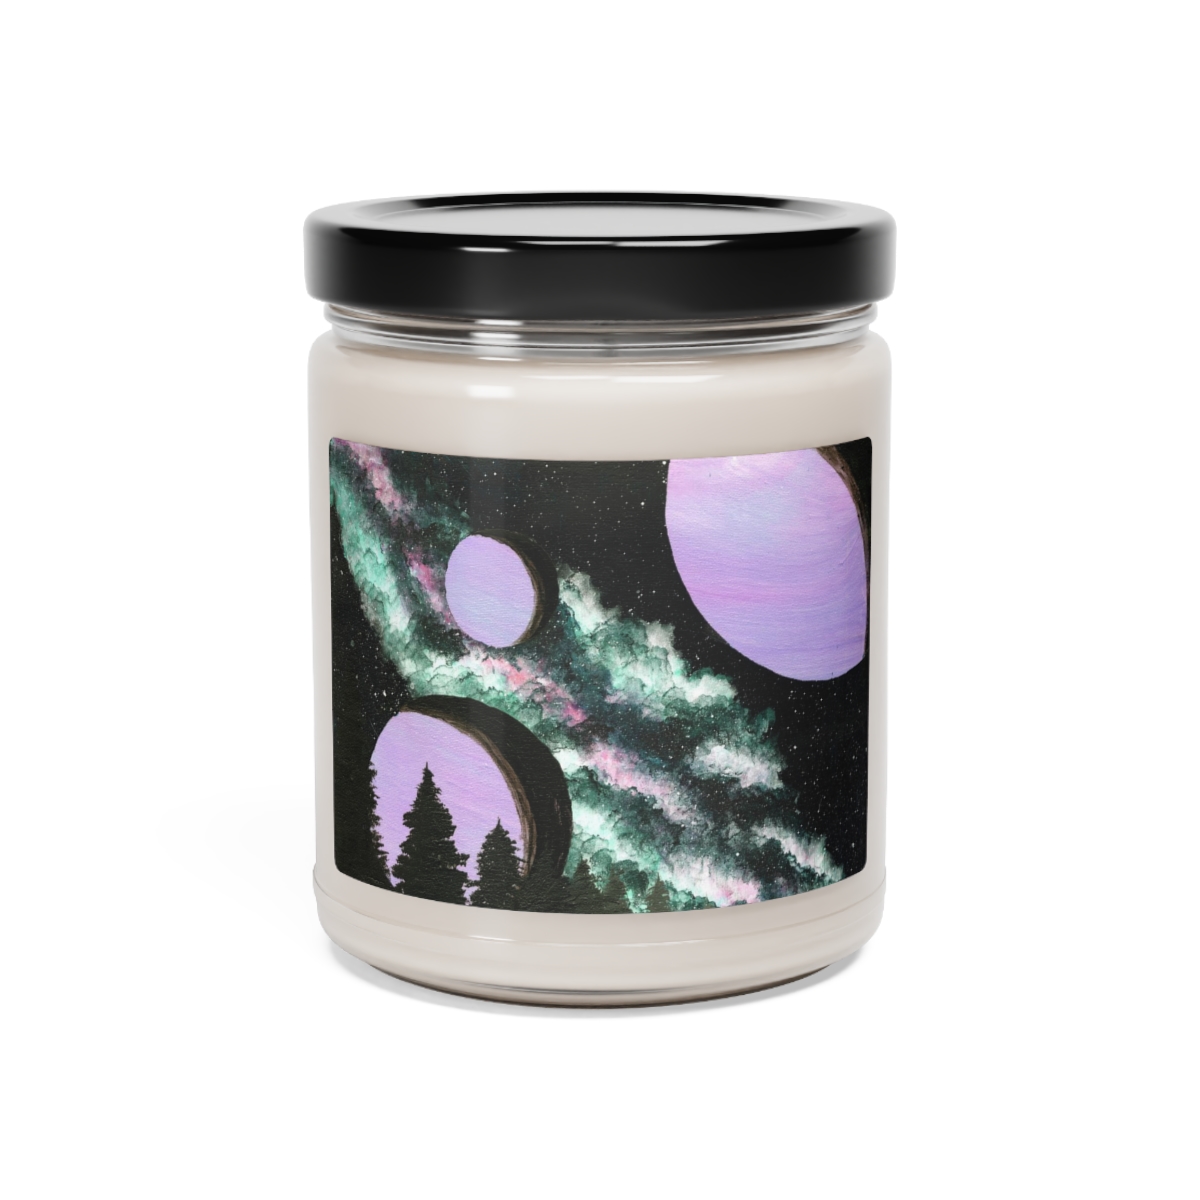 Galactic Night - Peppered Passionfruit Scented Soy Candle, 9oz